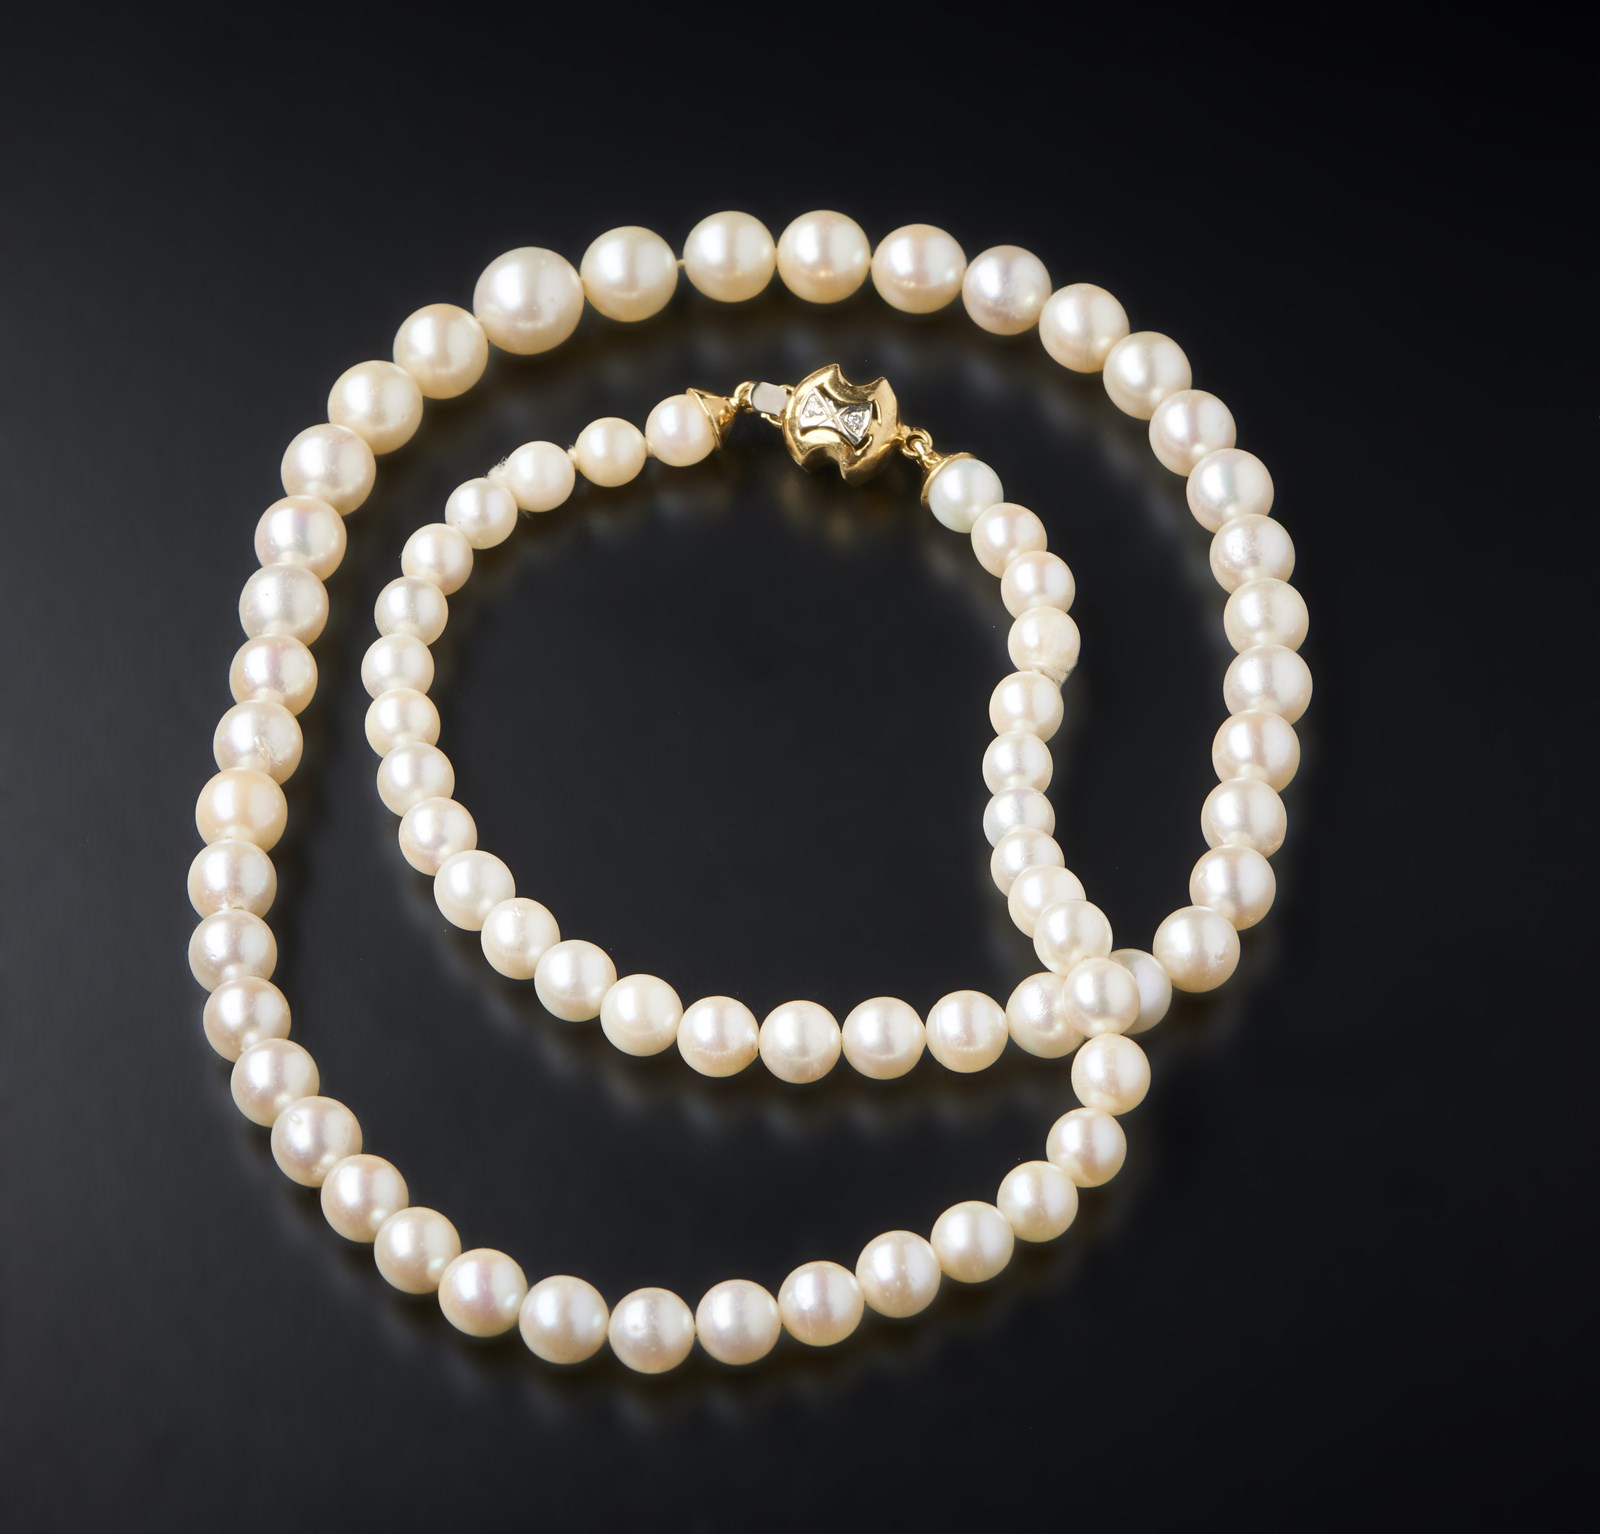 7 mm spherical white cultured pearl wire with 750/1000 yellow gold clasp and small diamonds. (. )